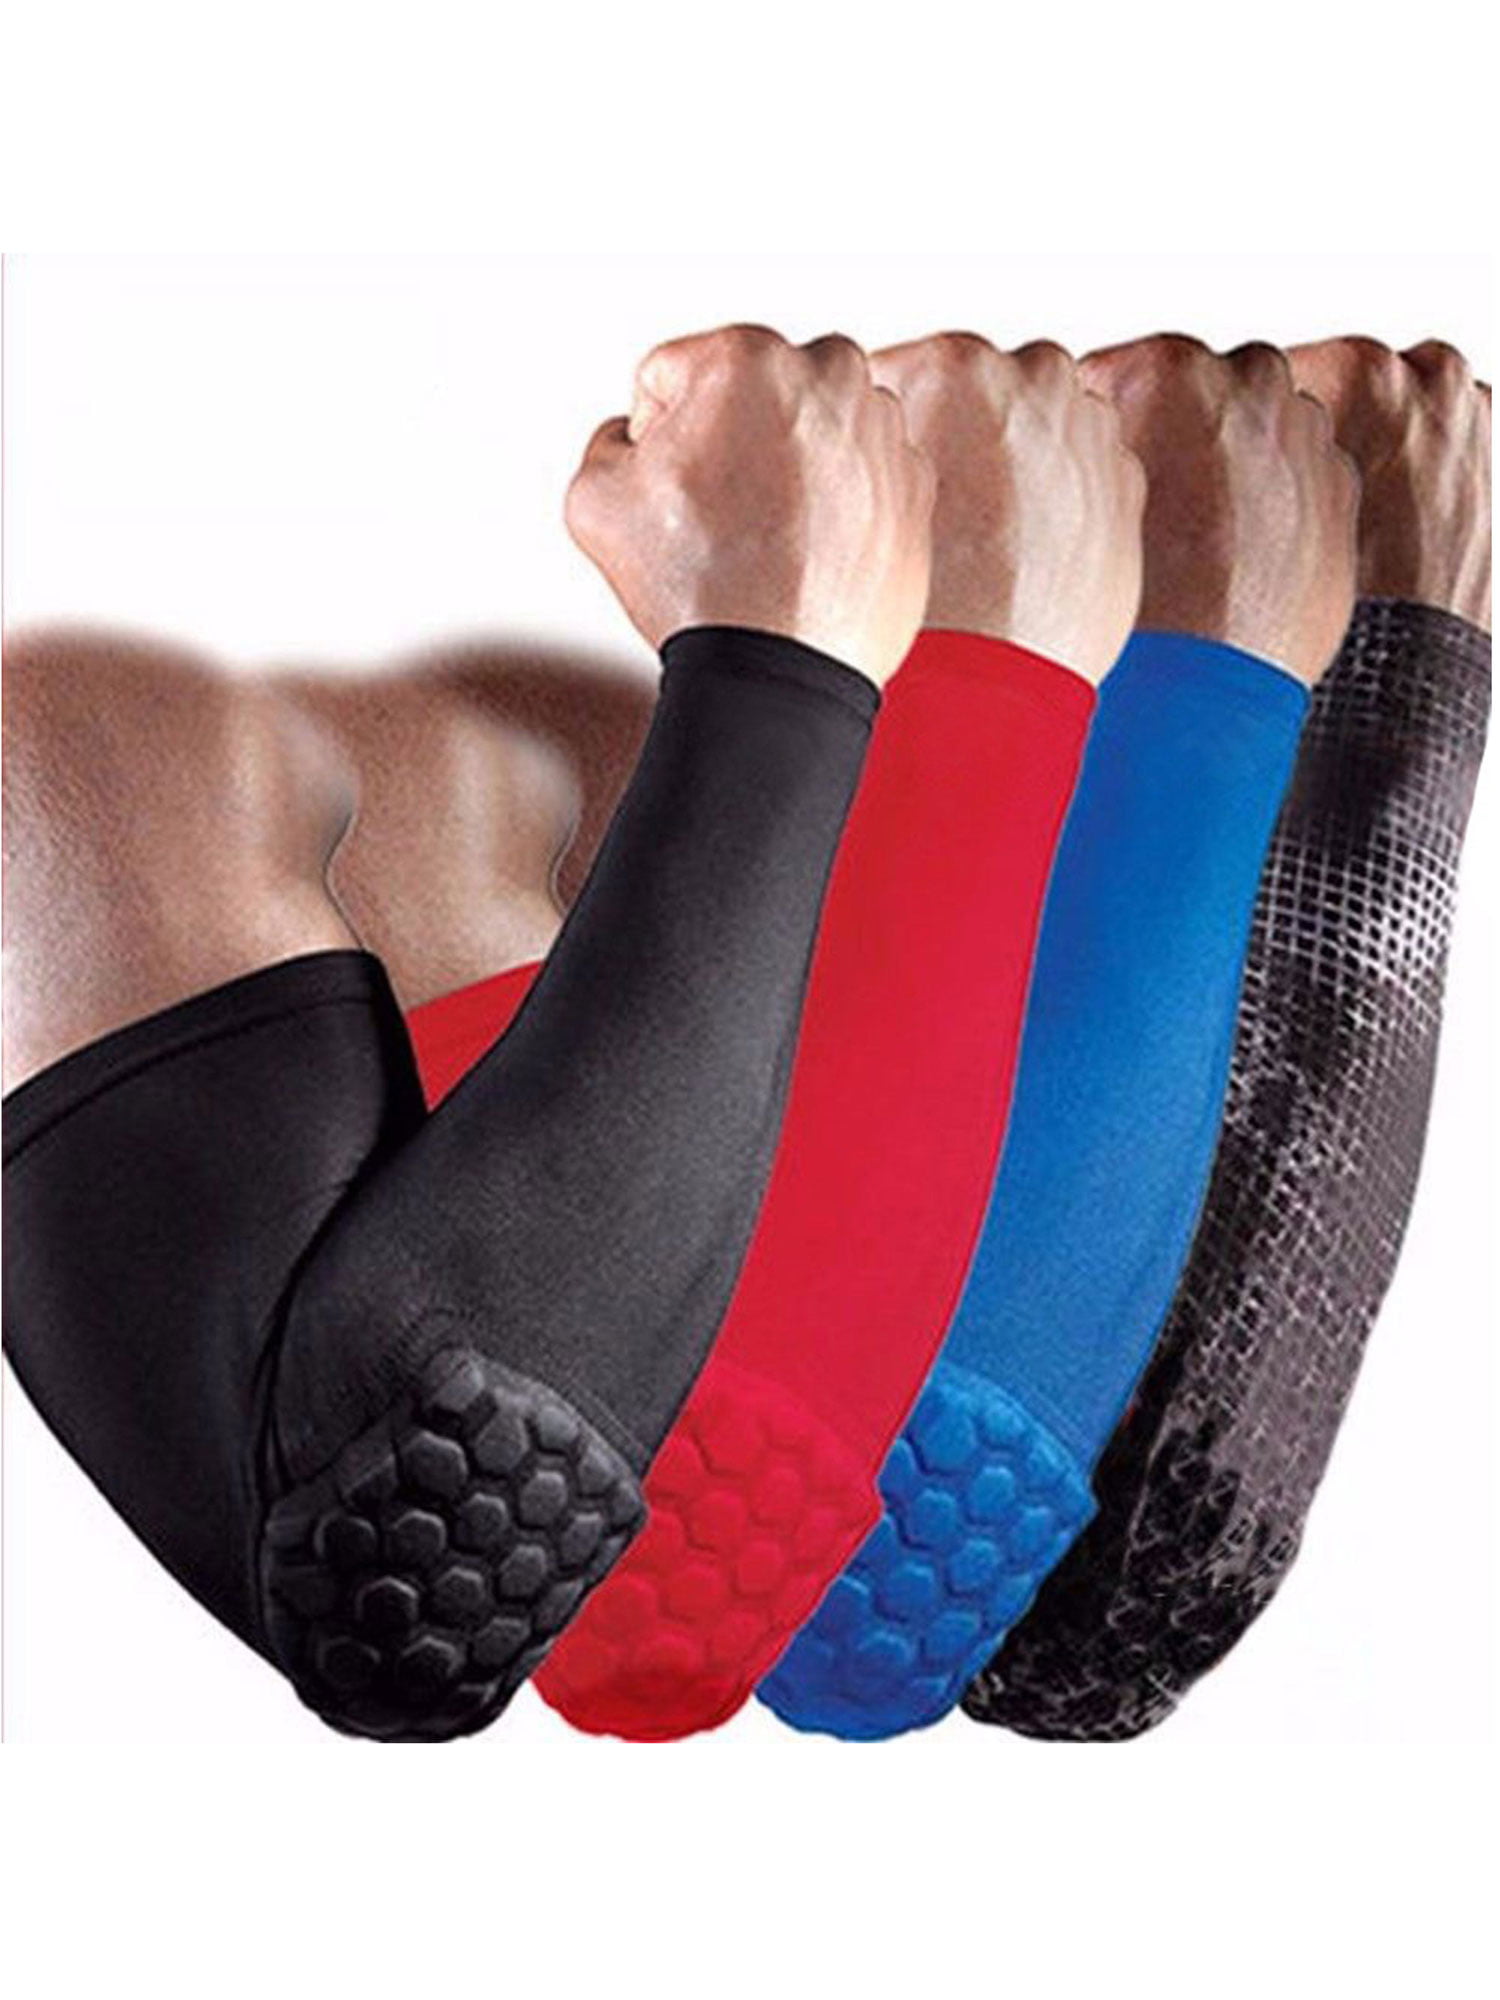 AND1 Compression Shooter Basketball Arm Sleeves Pair BLACK White NEW Mens M L 